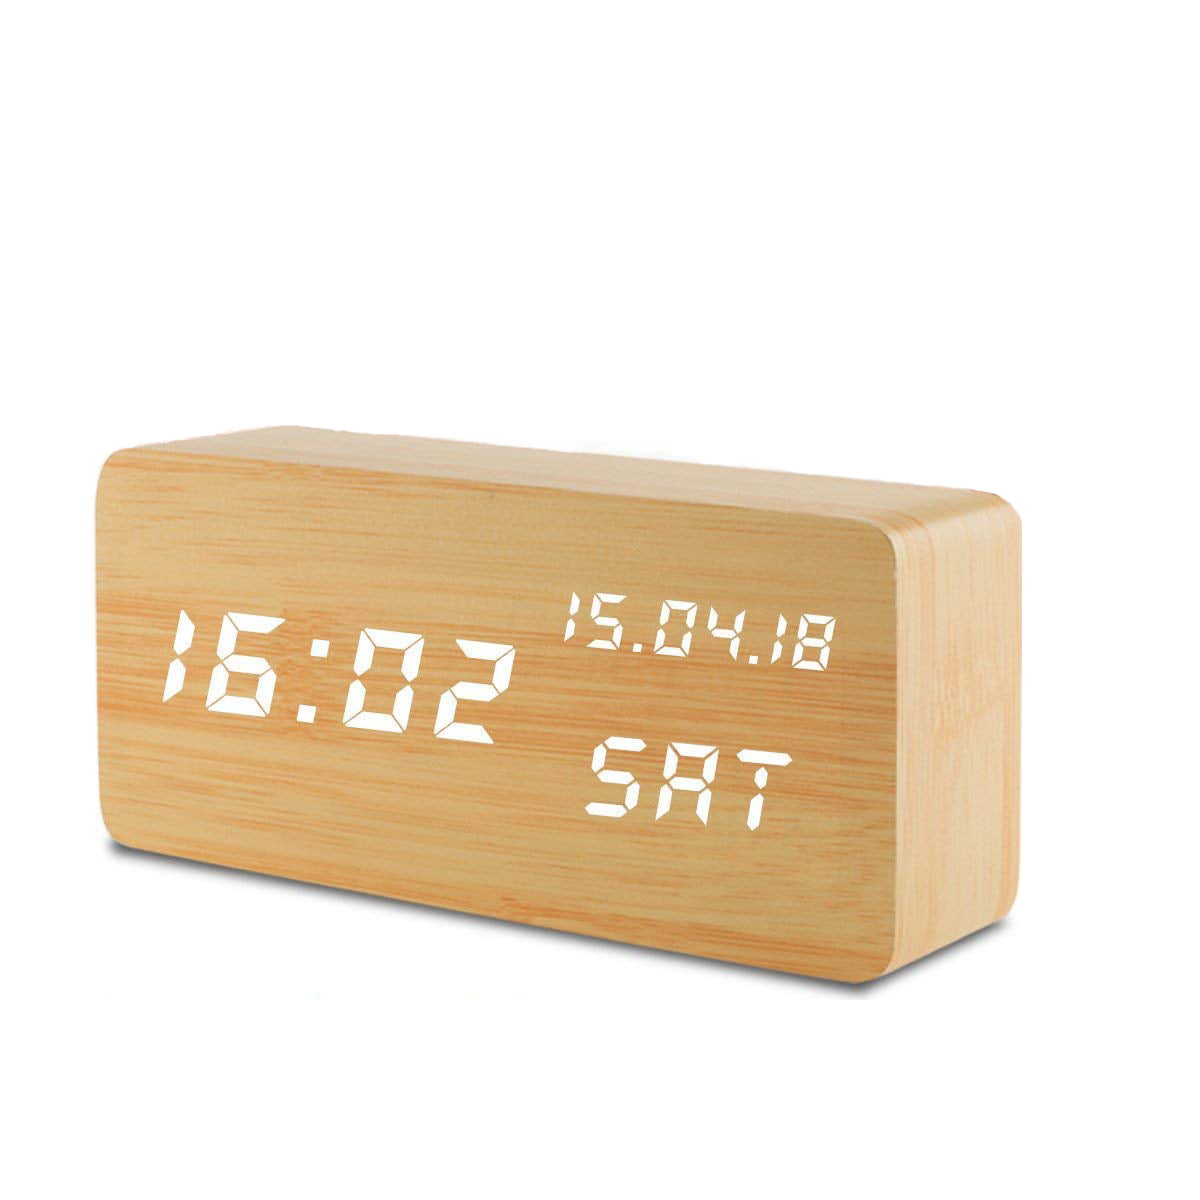 ACMEDE Wooden Travel Digital Cube LED Alarm Clock Desk Alarm Clock with 3 Brightness Adjustable,3 Set of Alarm,Dual Power,Voice Control,Time/Week/Date/Temperature/Humidity Displaying 